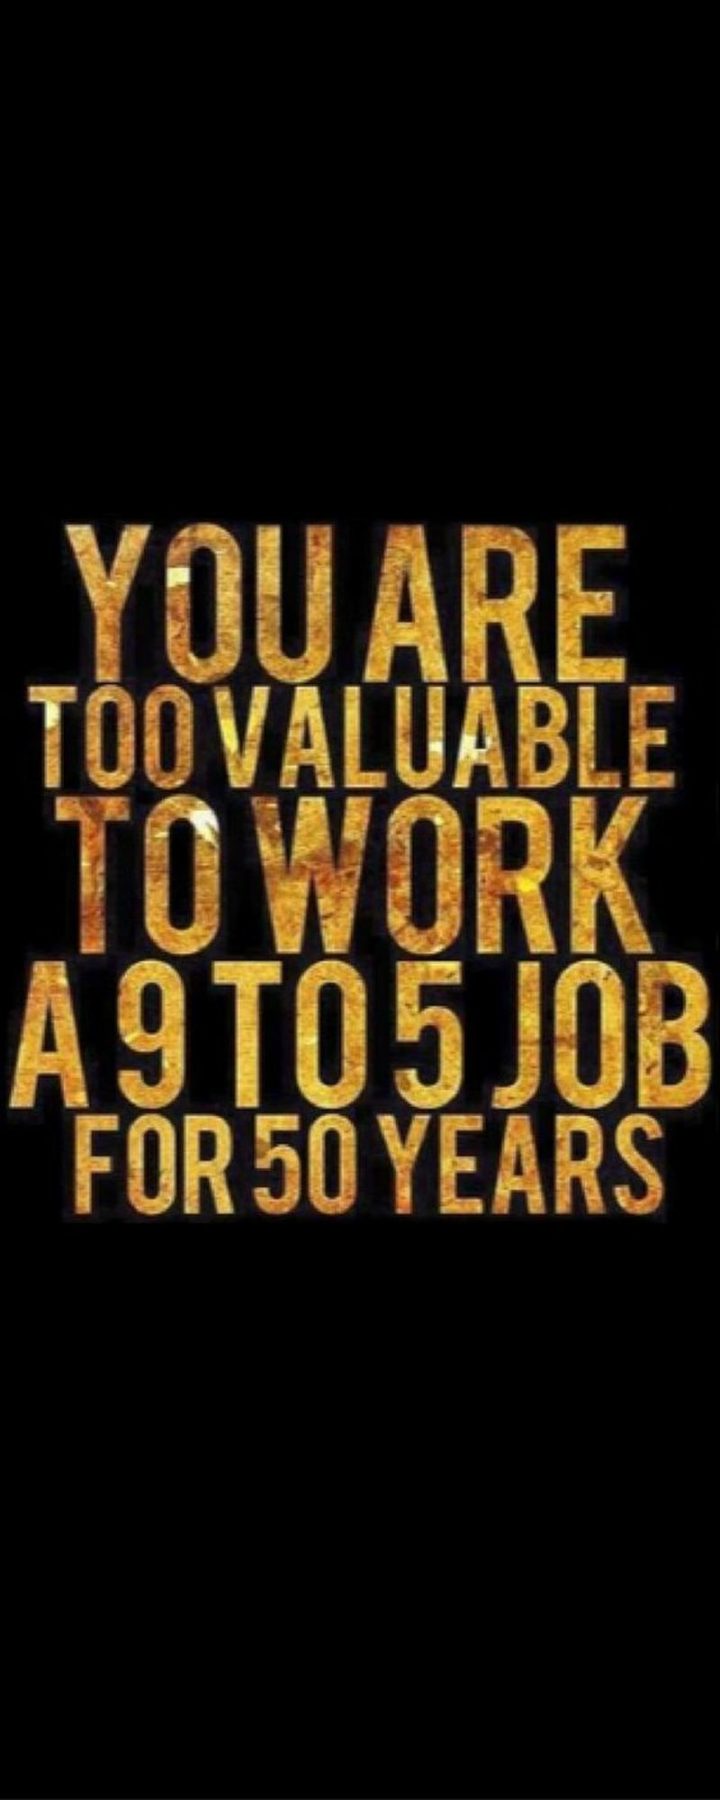 "You are too valuable to work a 9 to 5 job for 50 years."